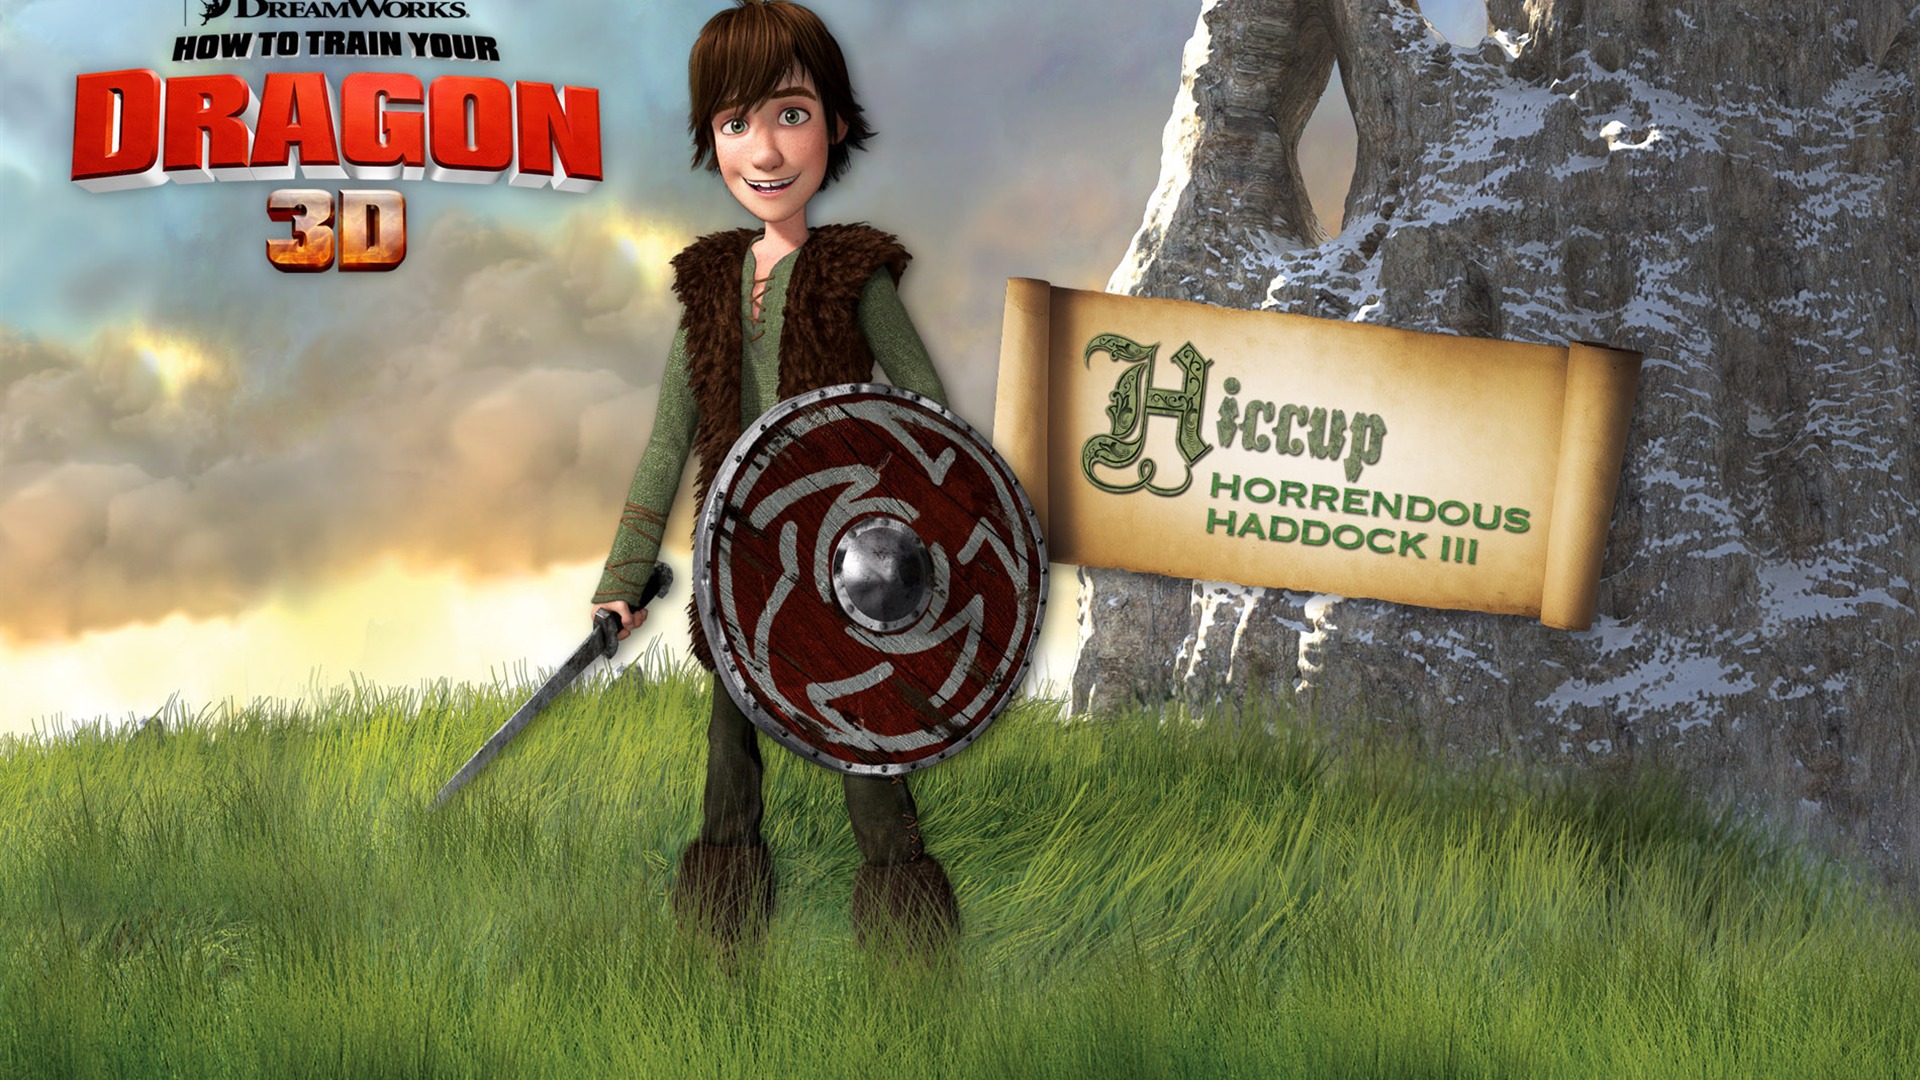 How to Train Your Dragon HD wallpaper #19 - 1920x1080